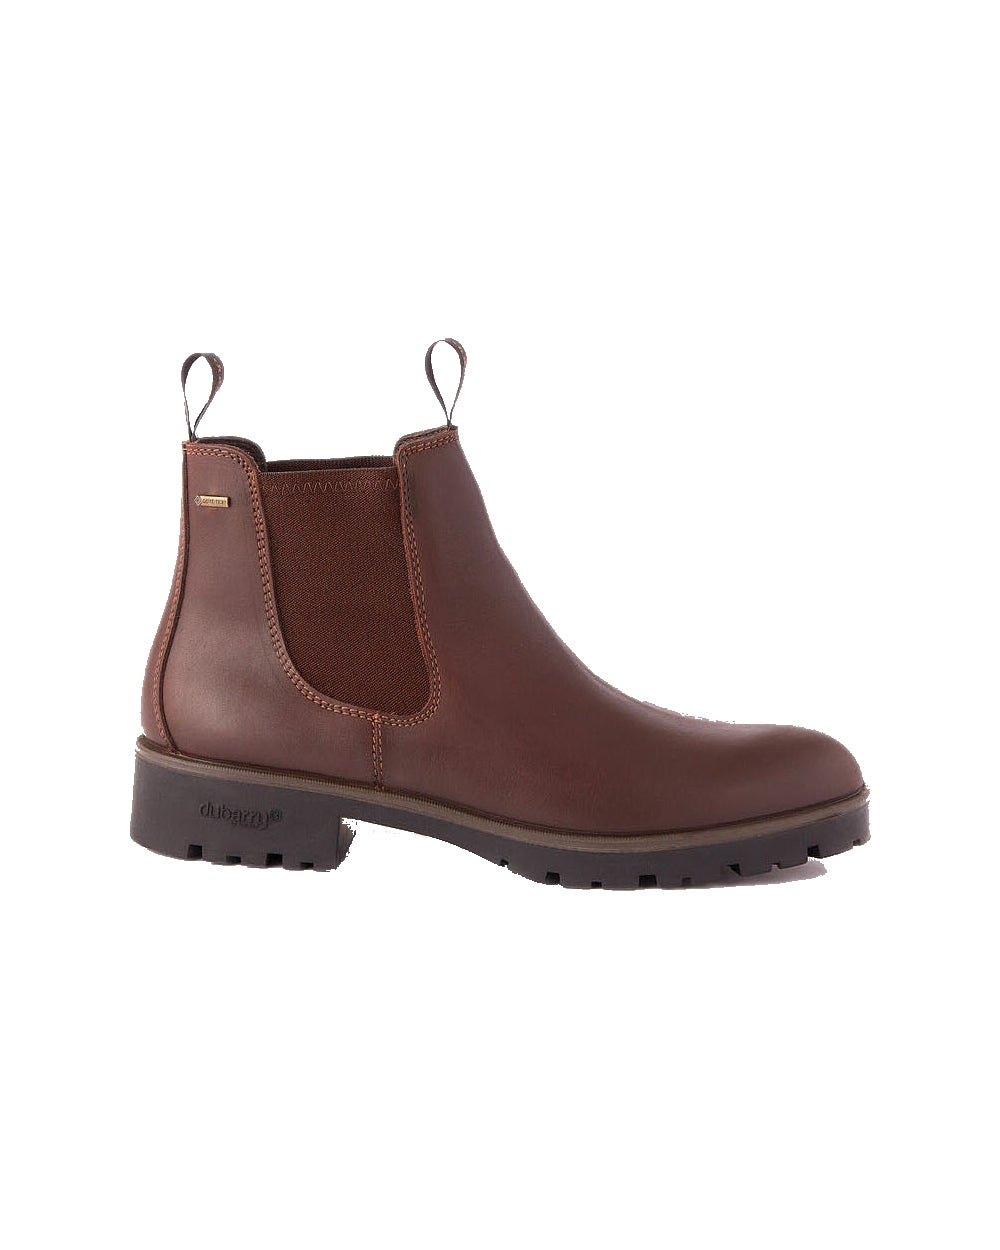 Dubarry Antrim Country Boots in Mahogany 